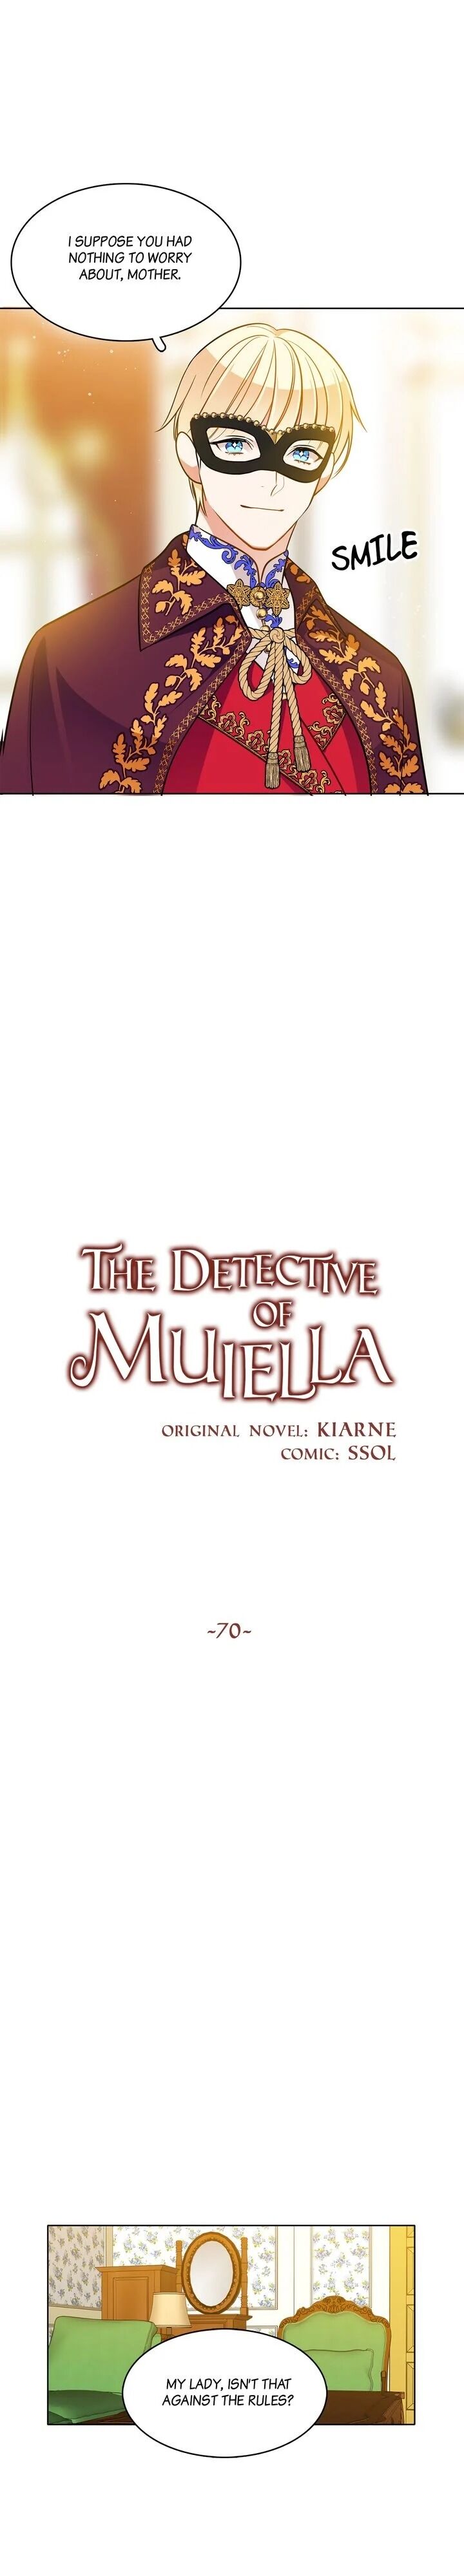 The Detective Of Muiella - Page 1